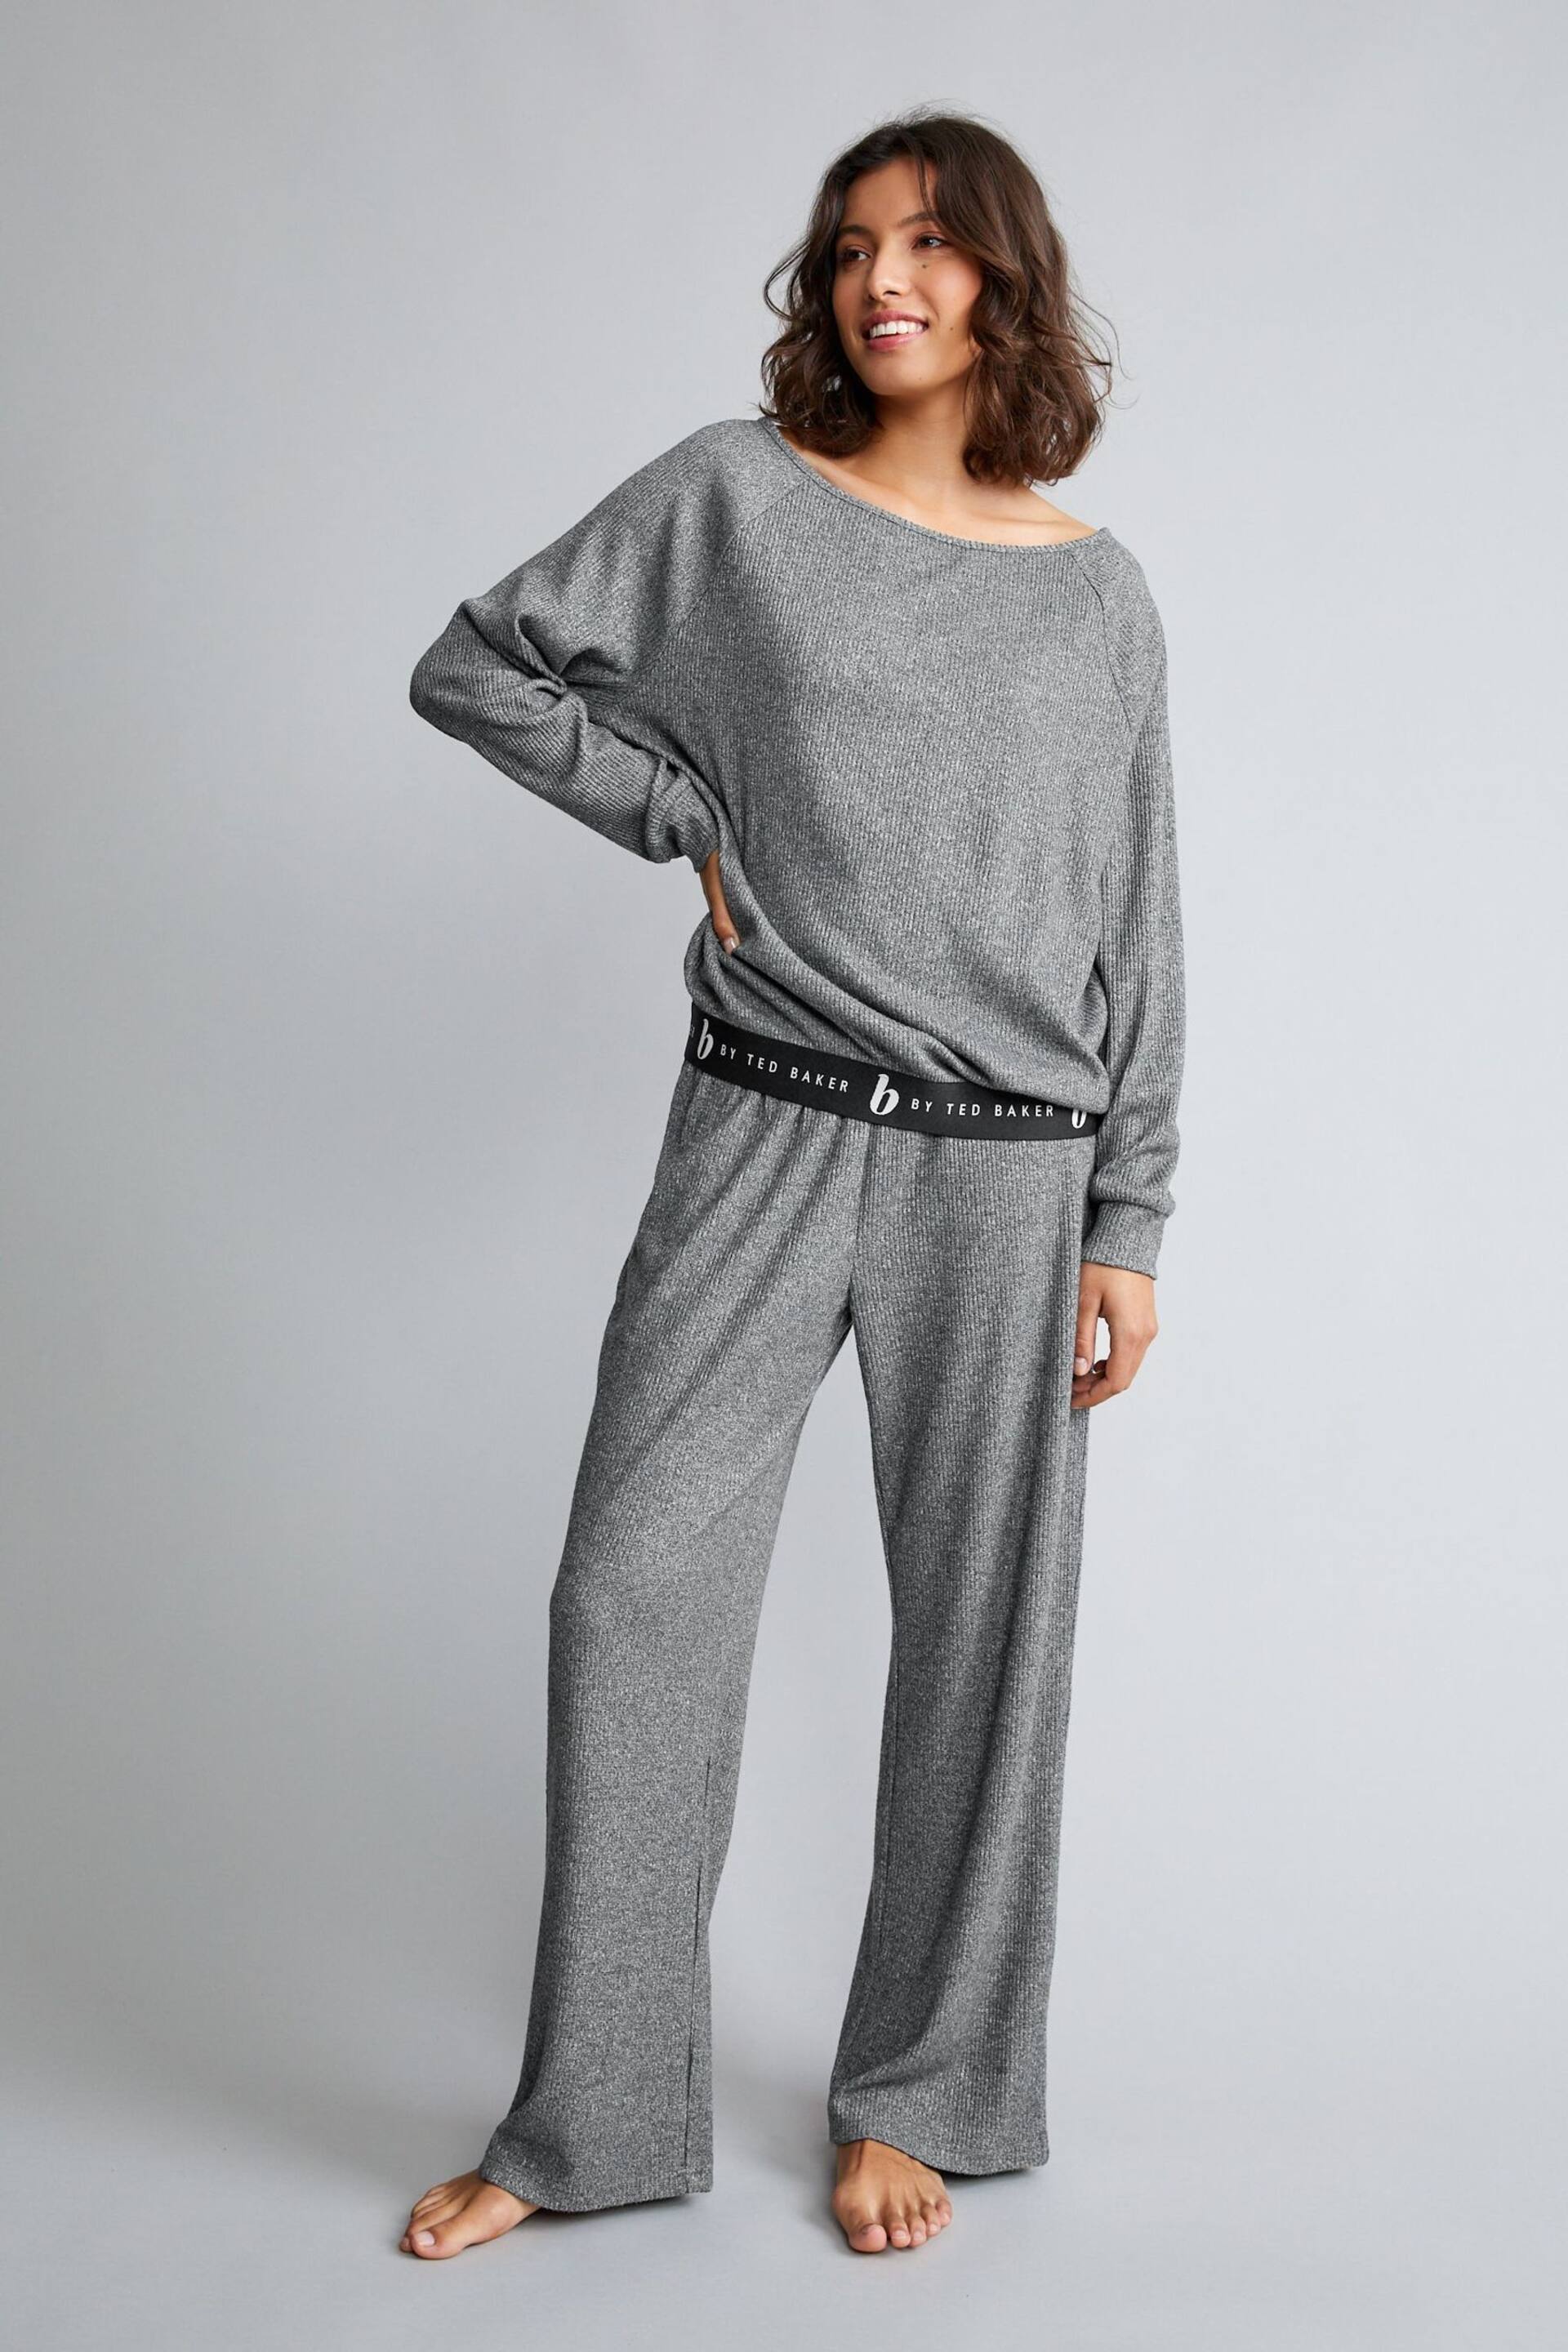 B by Ted Baker Rib Loungewear Trousers - Image 1 of 6